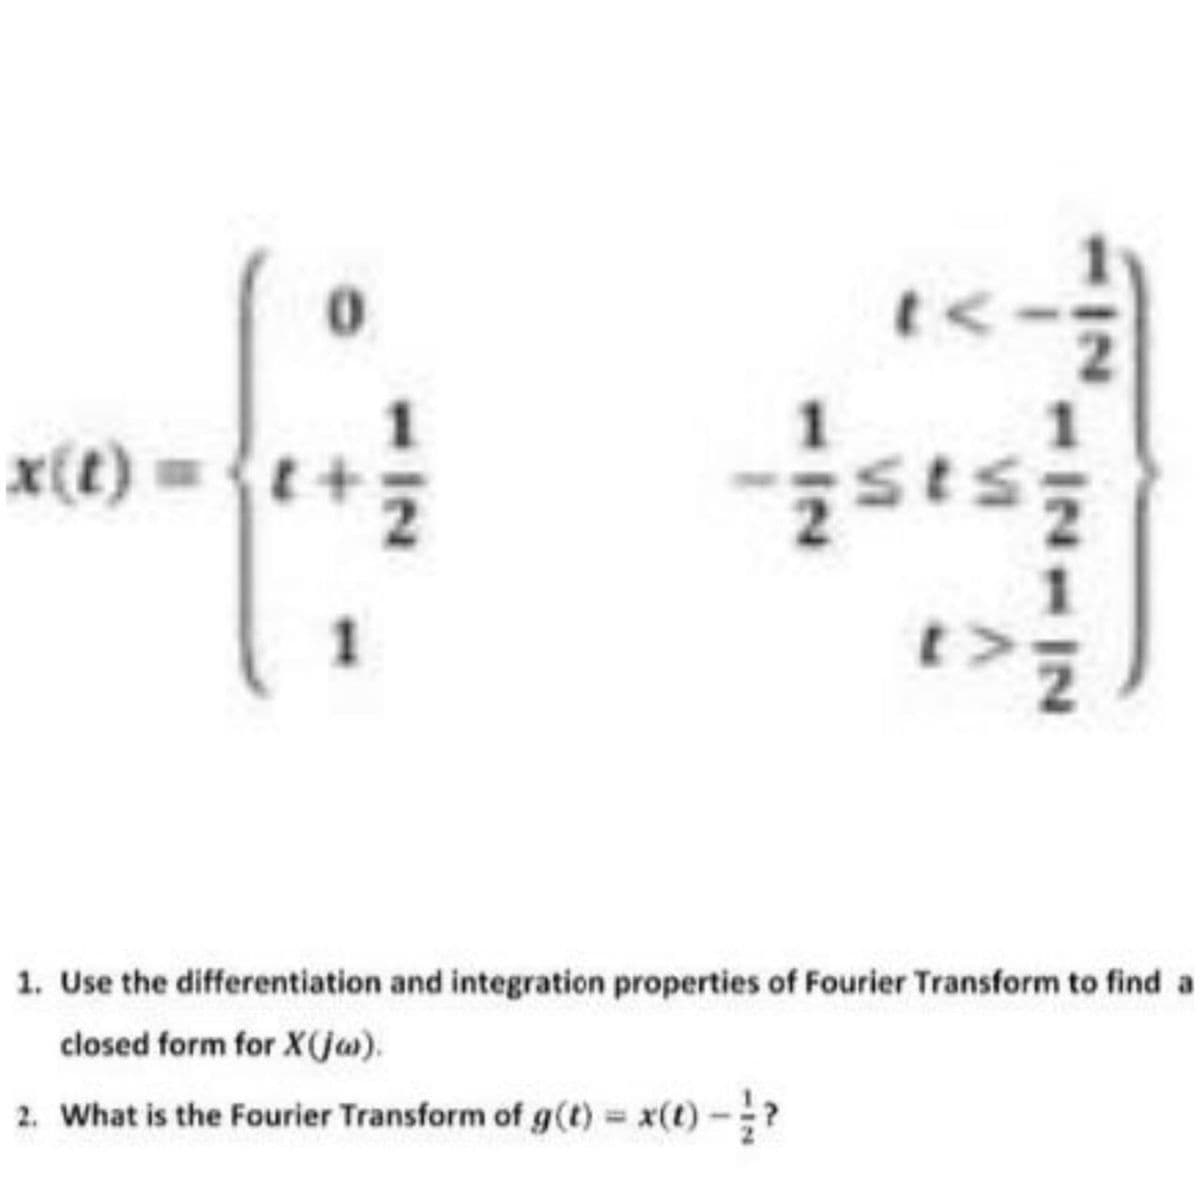 t<
x{t) =
1. Use the differentiation and integration properties of Fourier Transform to find a
closed form for X(ja).
2. What is the Fourier Transform of g(t) = x(t)-?
IN
112117
VI
112
